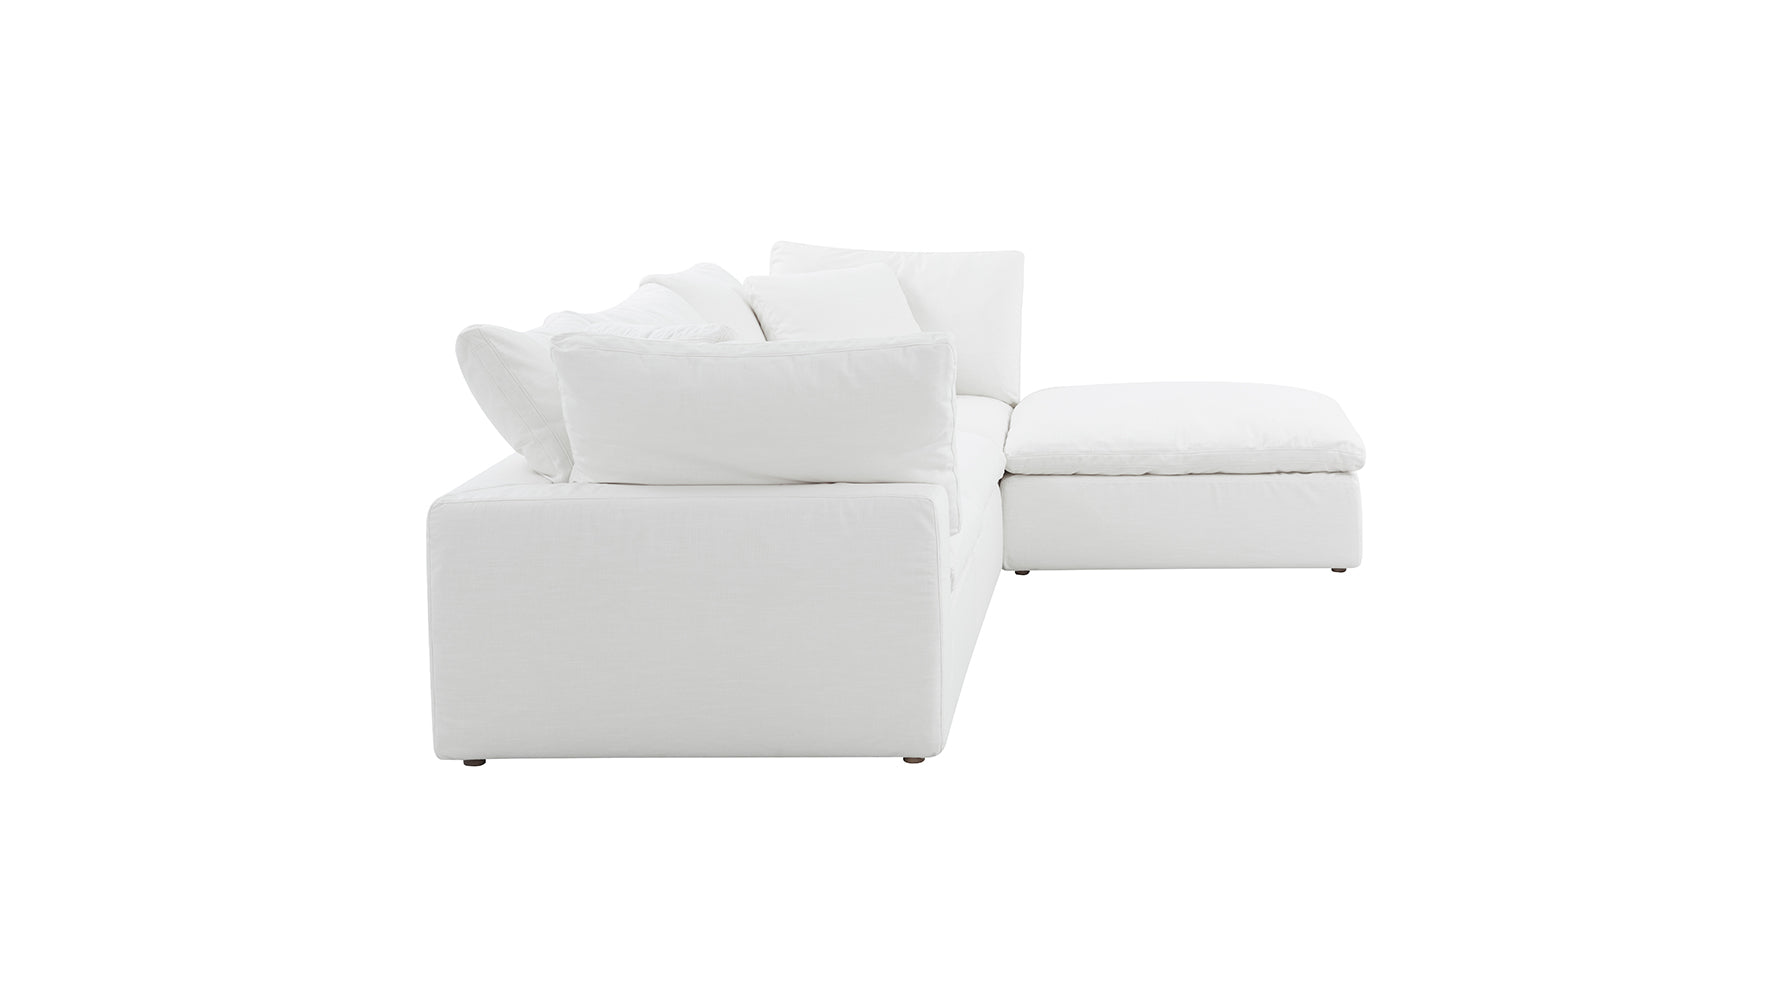 Movie Night™ 4-Piece Modular Sectional, Large, Brie - Image 7